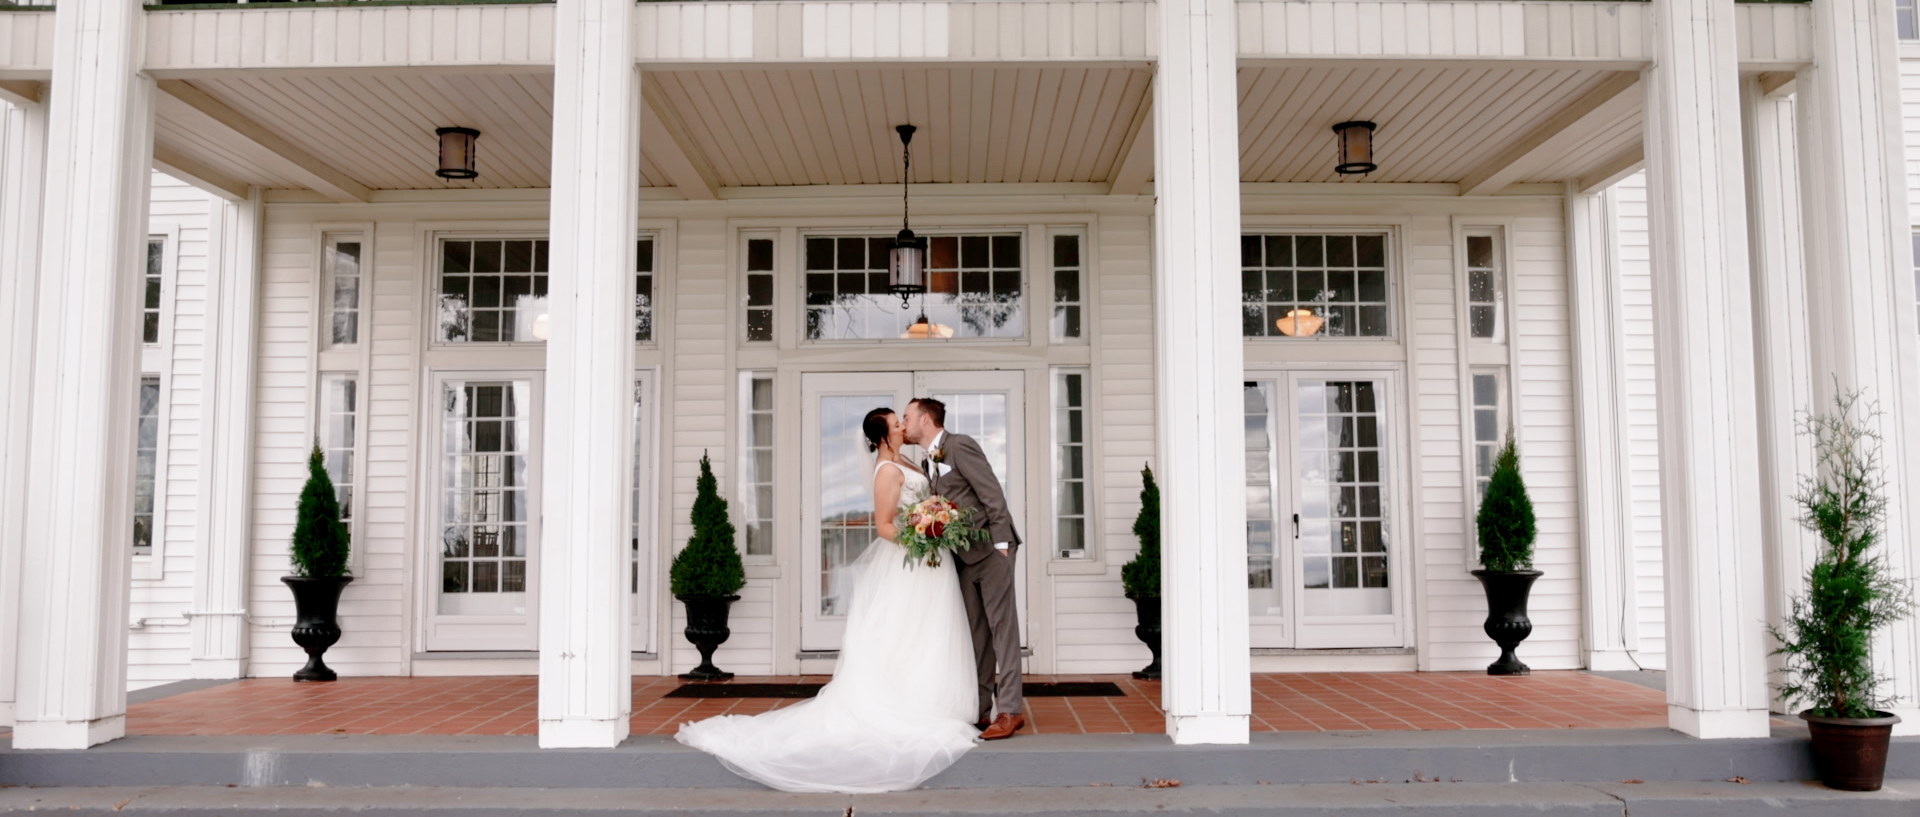 Bride and groom kiss under the columns on the front porch during their Waldenwoods wedding in Howell, Michigan.